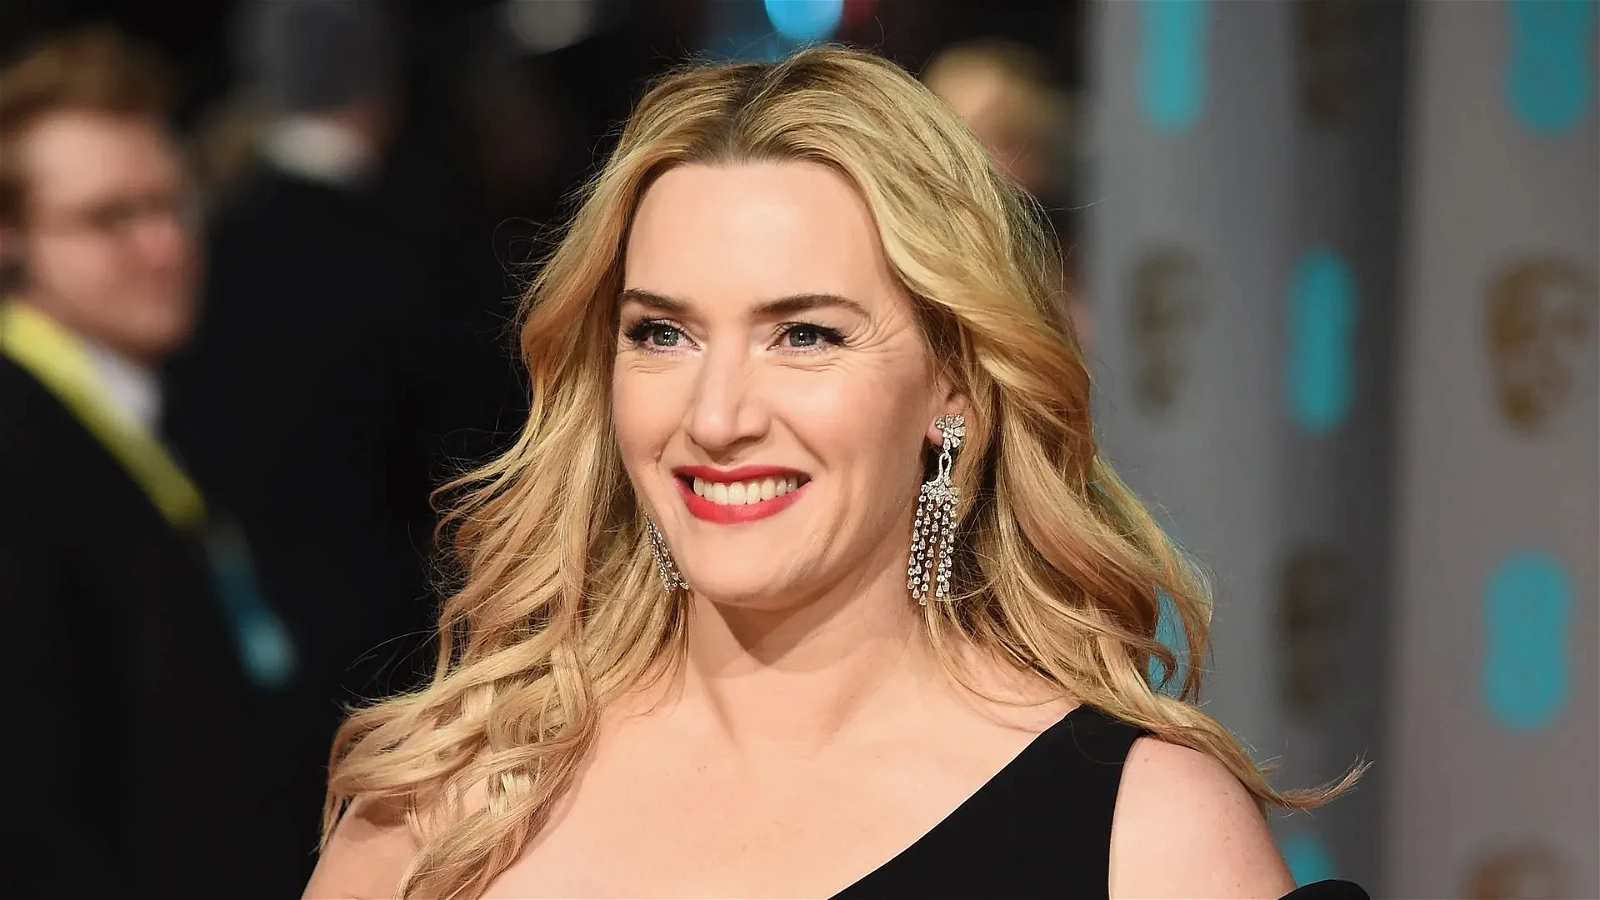 Kate Winslet is a globally renowned actress